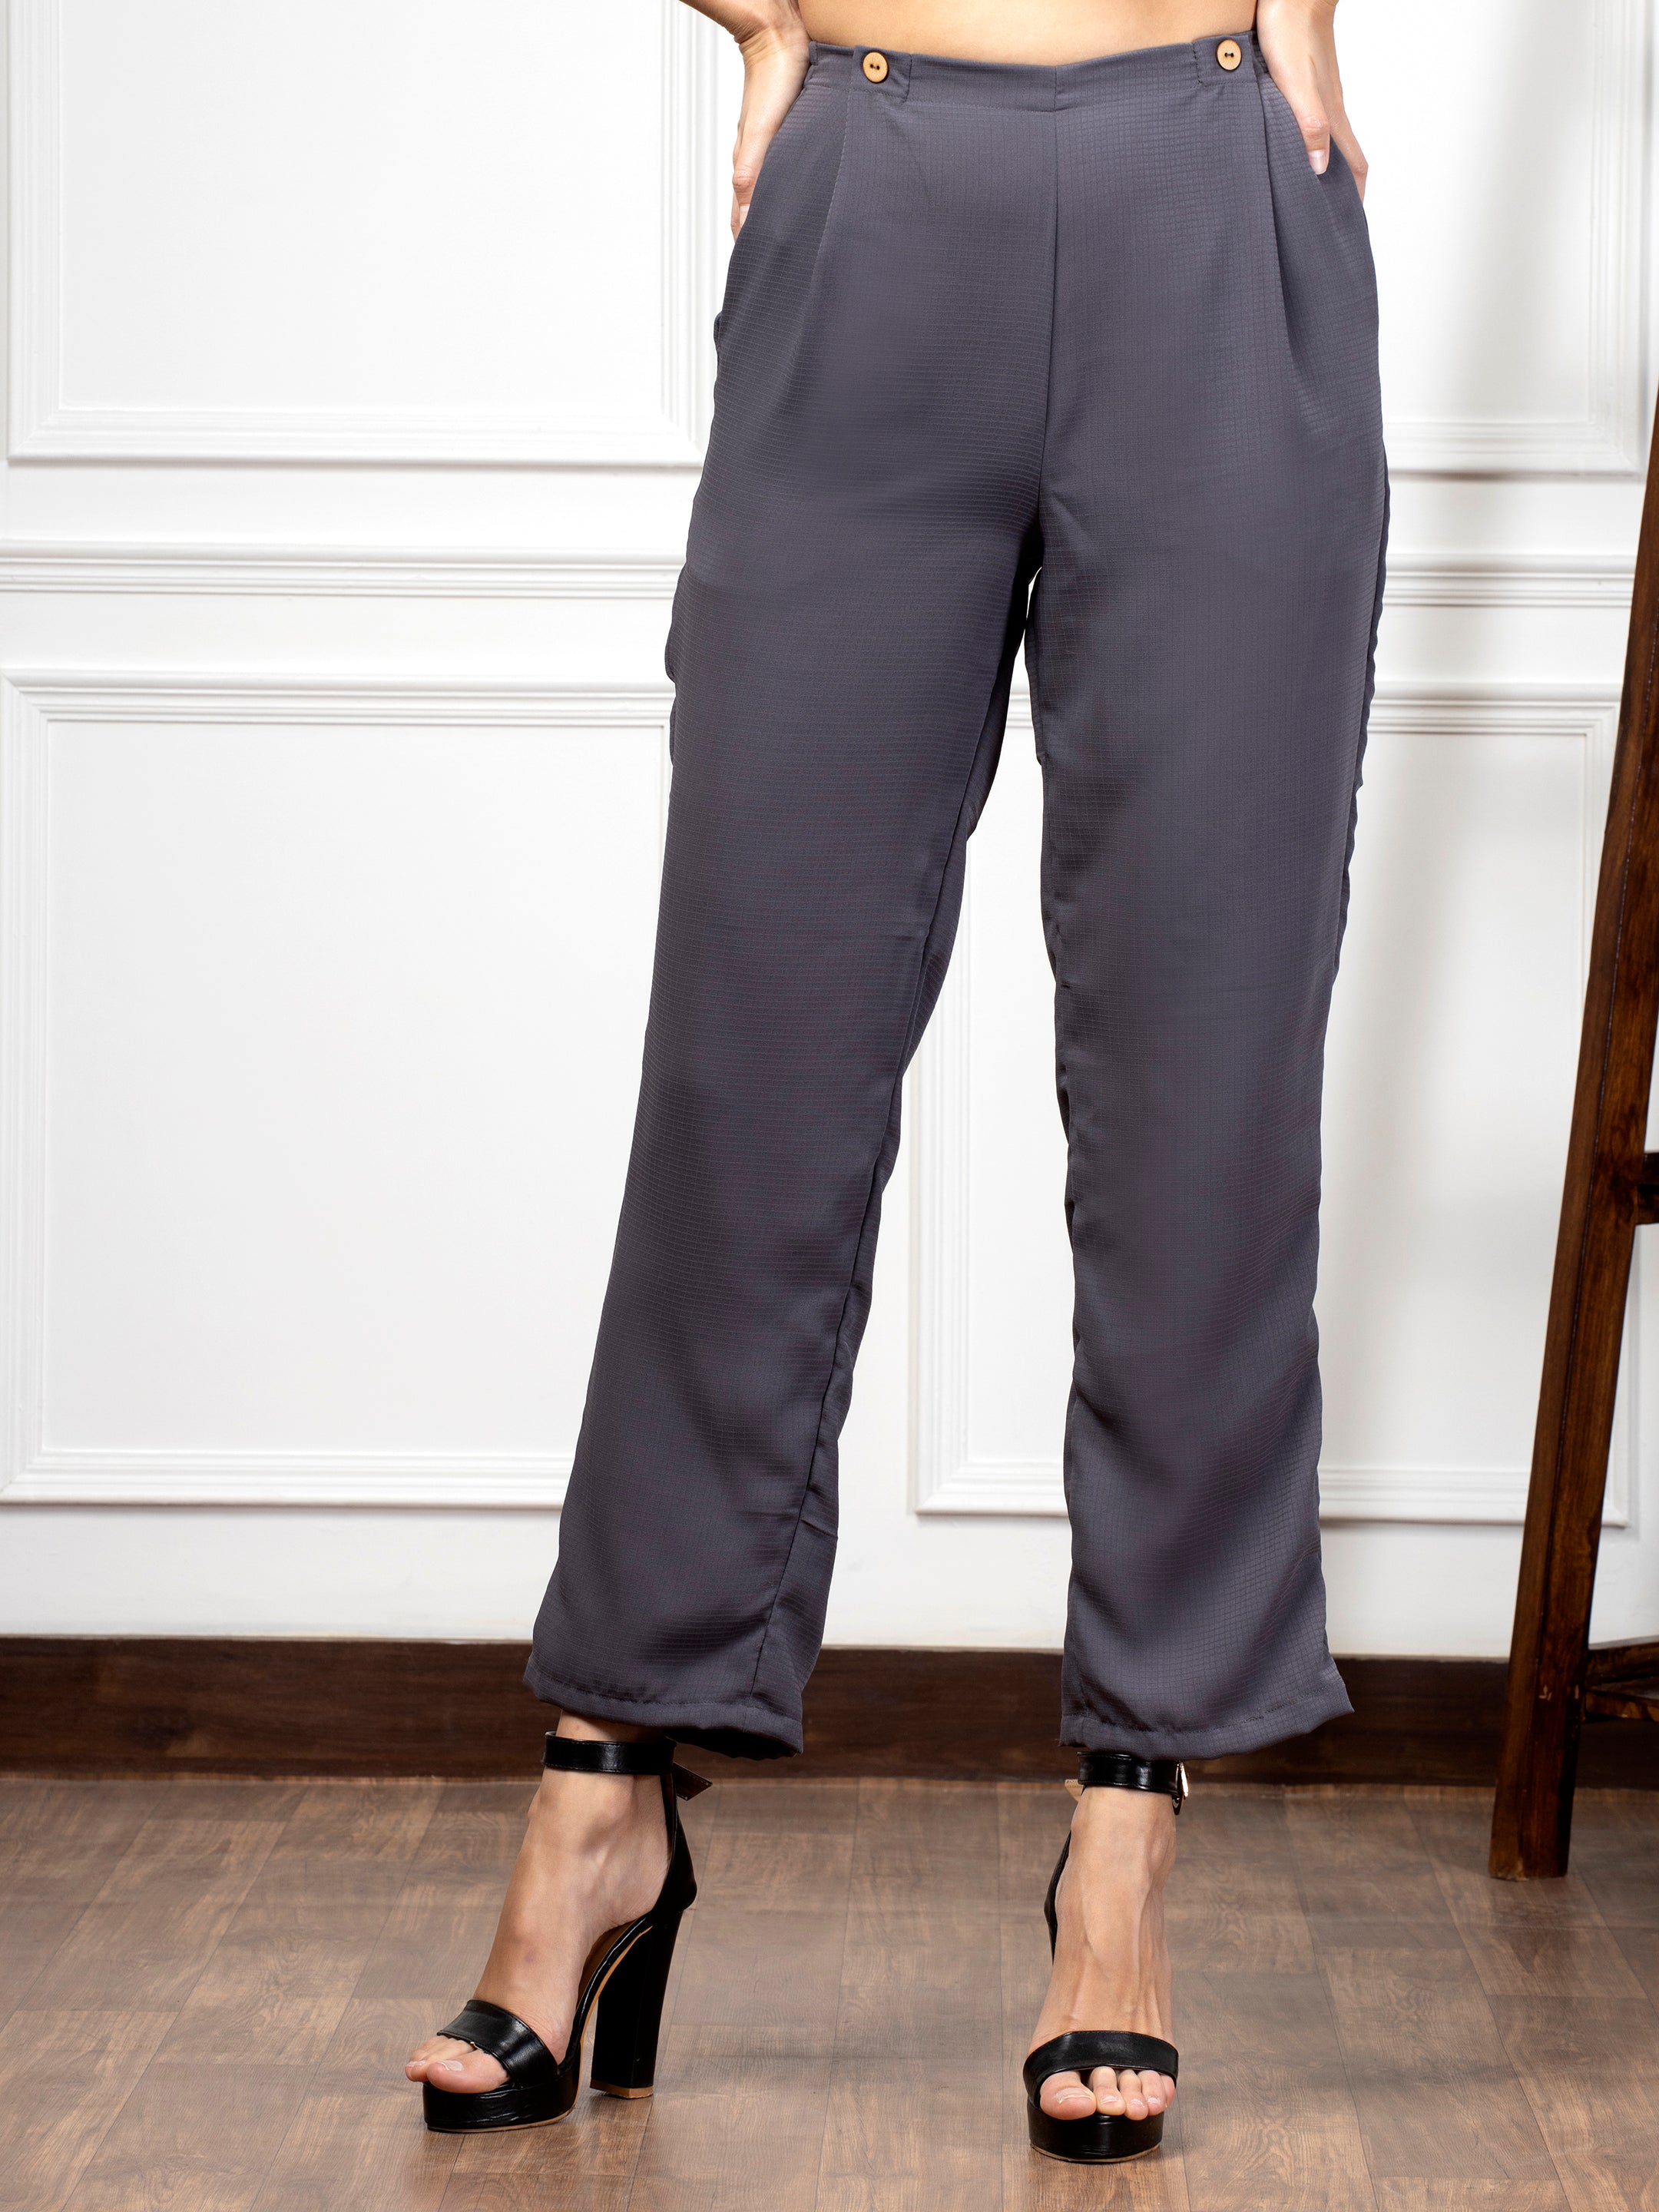 Trousers for Women Inspired by Celebrity Outfits